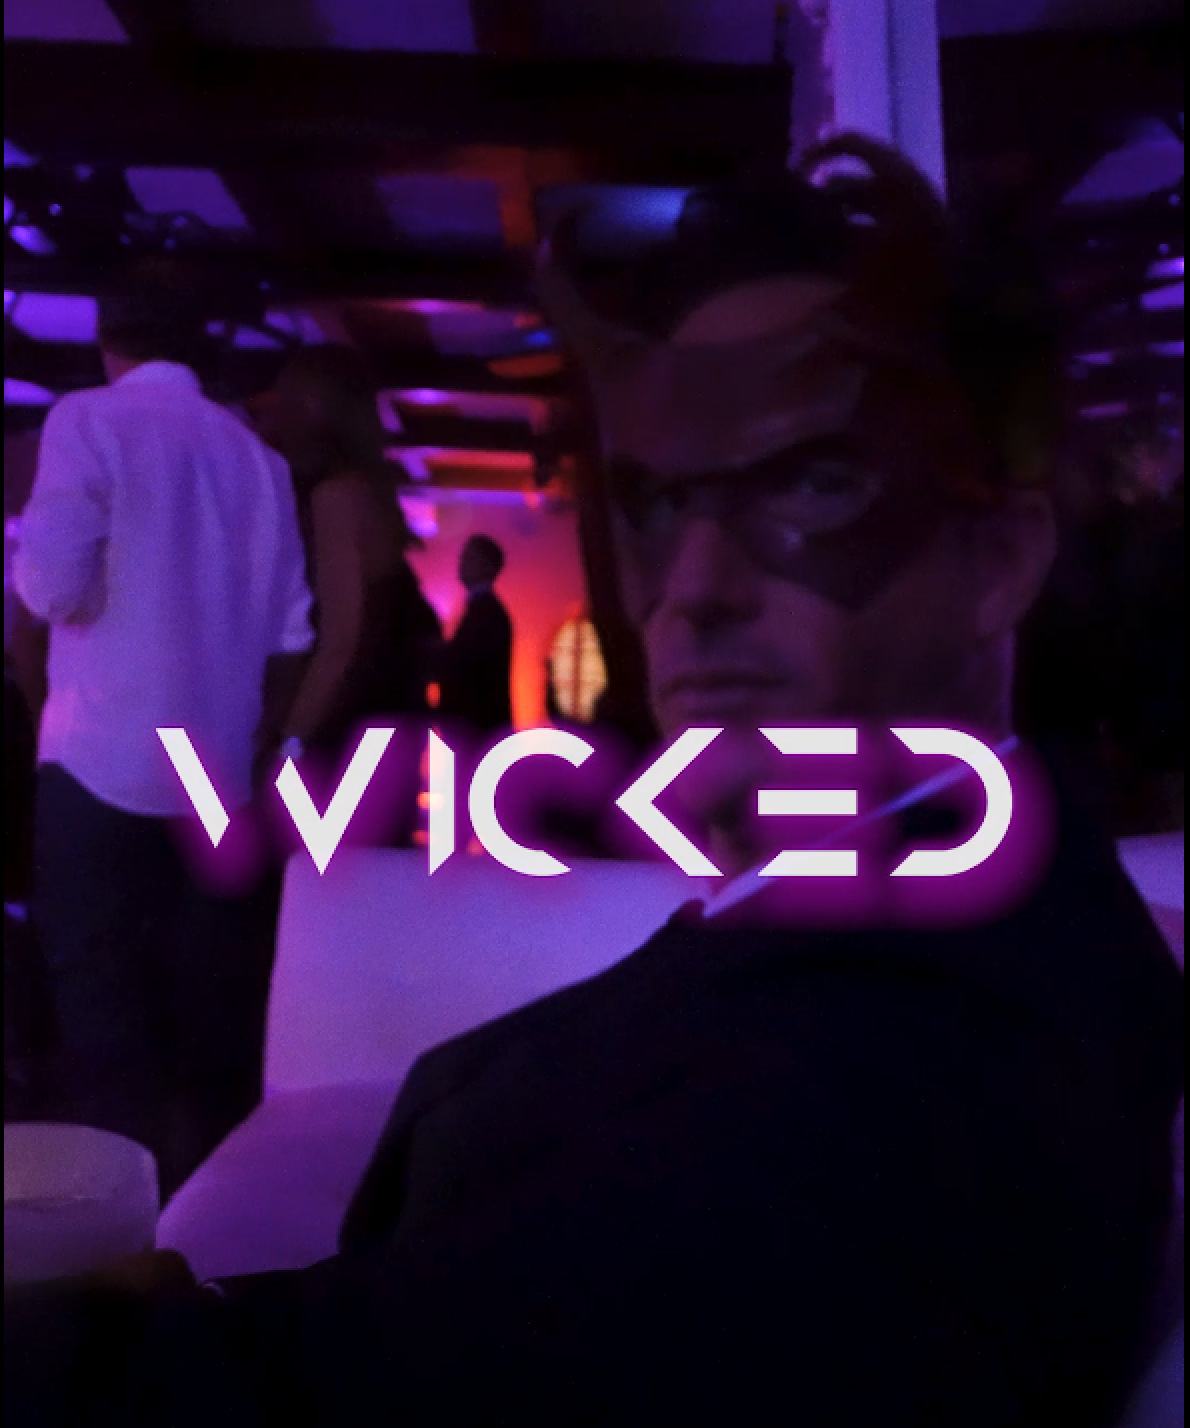 Wicked Video Intro